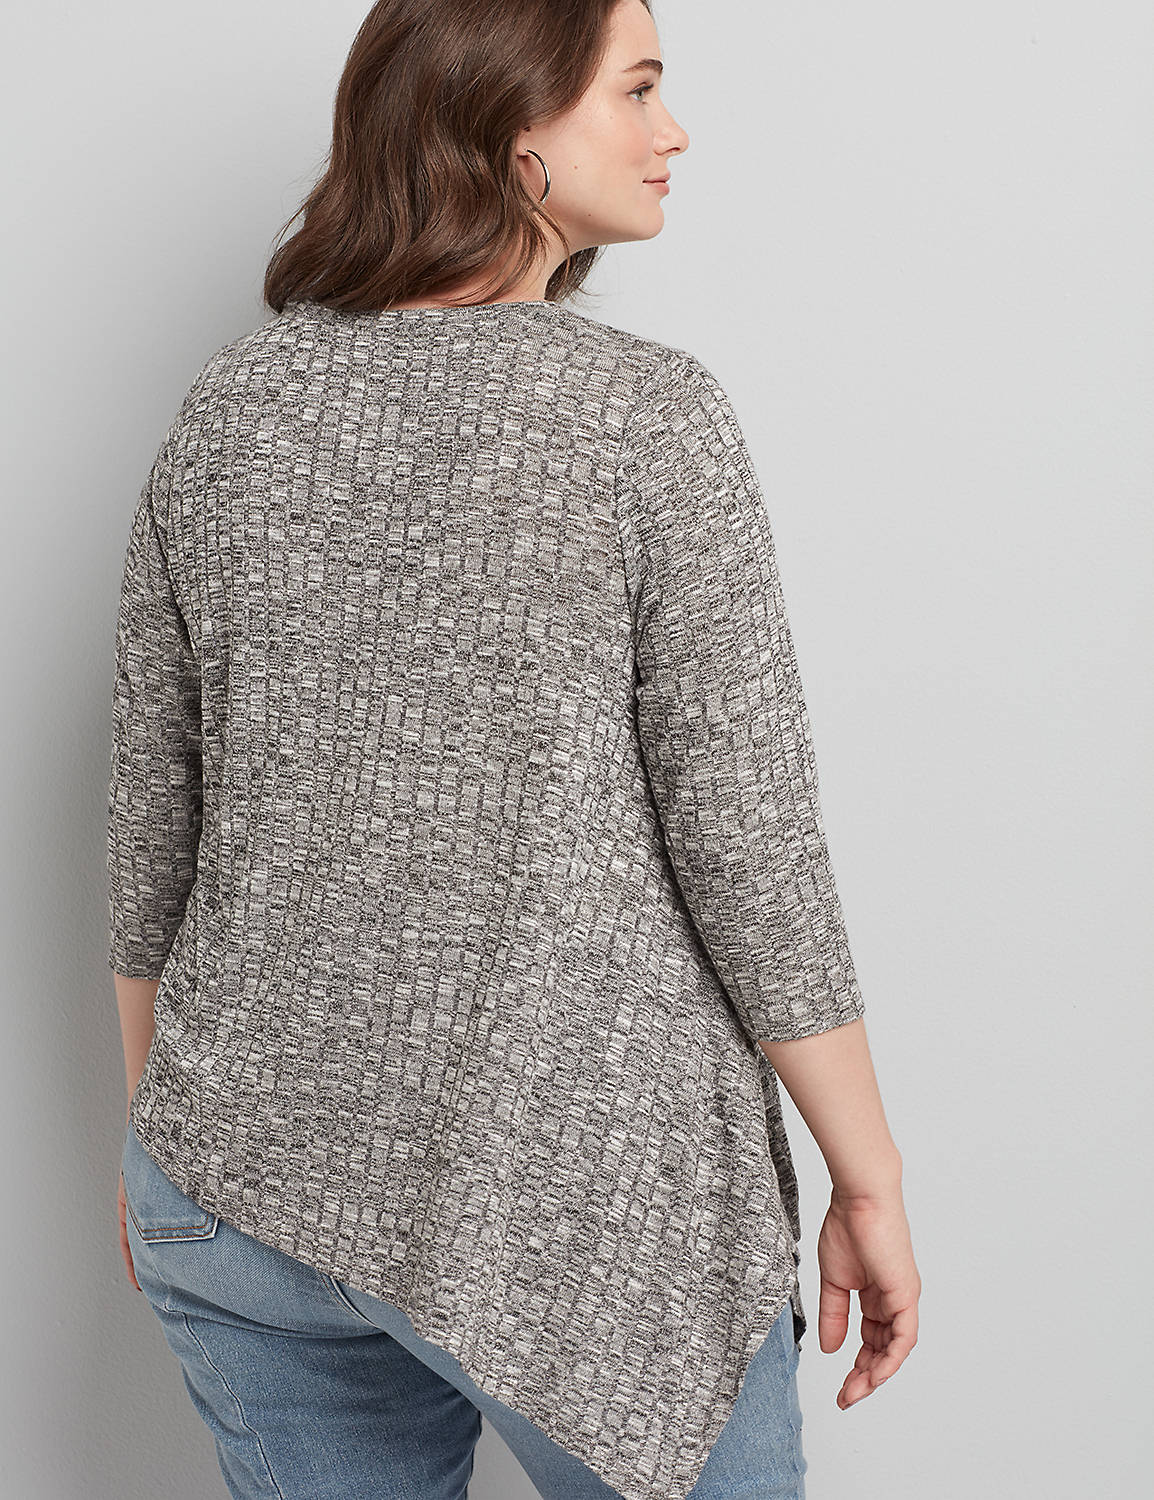 3/4 Sleeve Crew Neck Draped Asym Hacci Rib Top 1113987:Med Grey Heather:18/20 Product Image 2